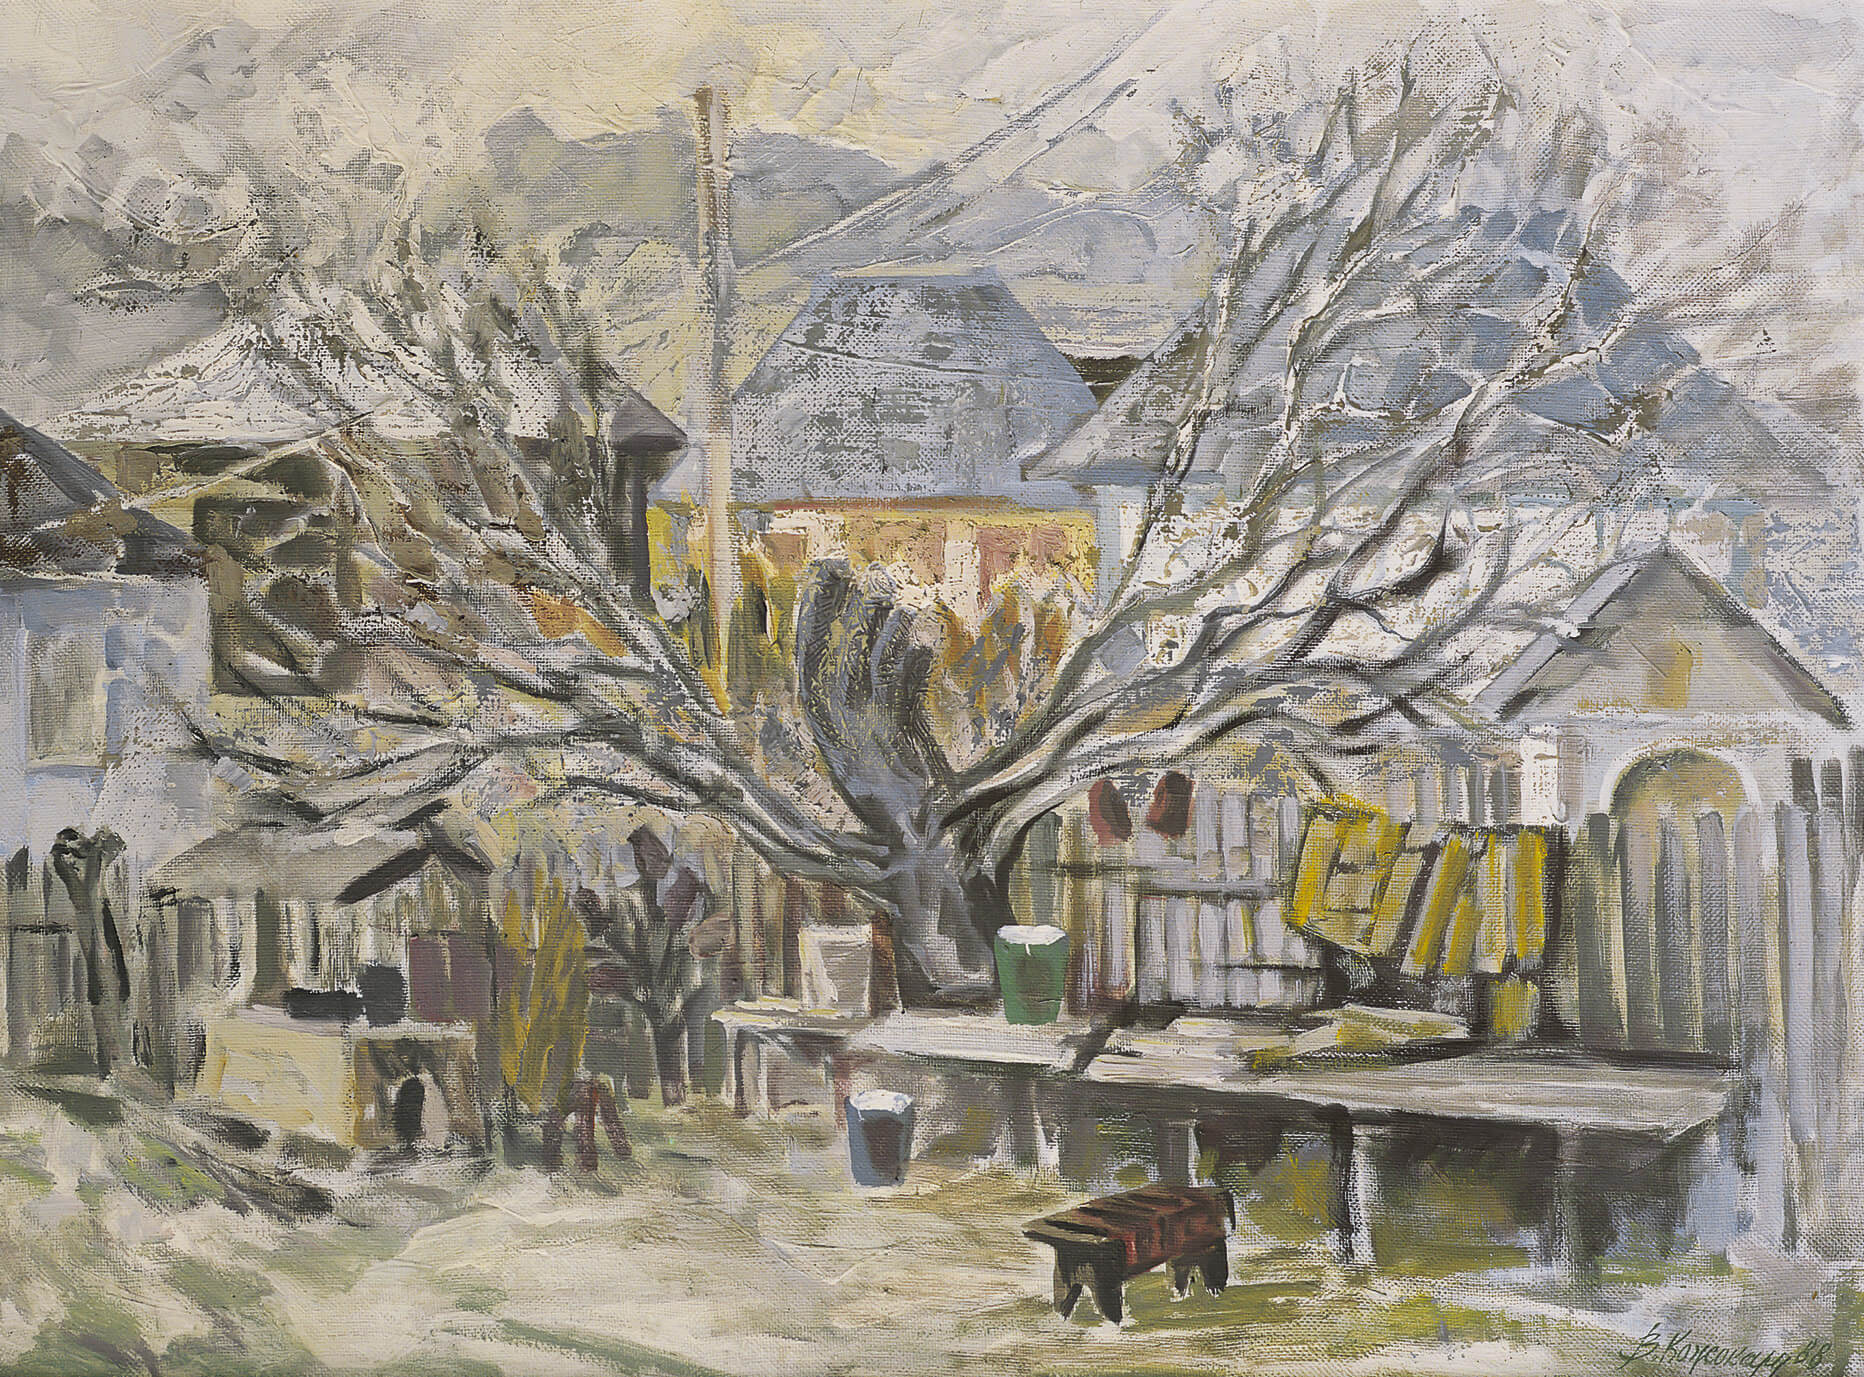 The Life of the Wallnut Tree.
In IlEana’s Courtyard. Painting by Vasile Cojocaru